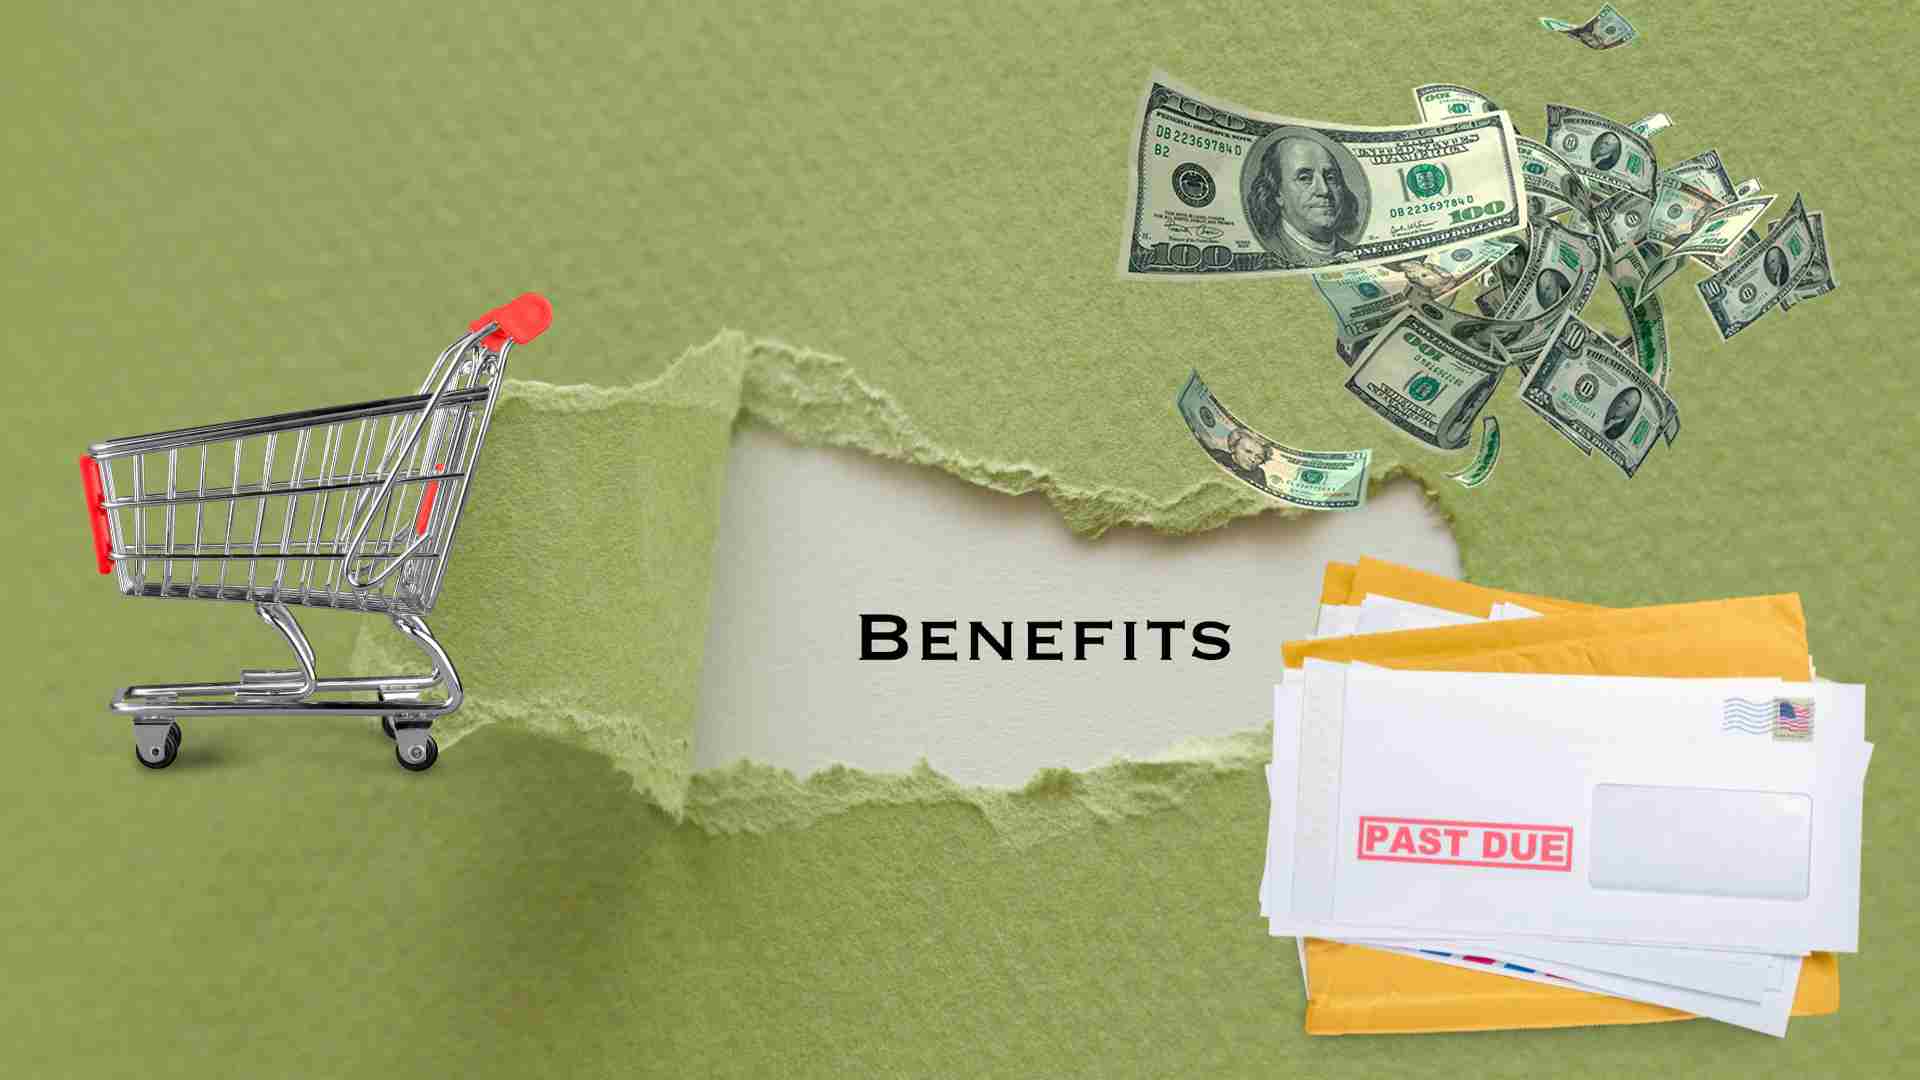 Applying for benefits like SSI or SNAP can help you make ends meet in the United States